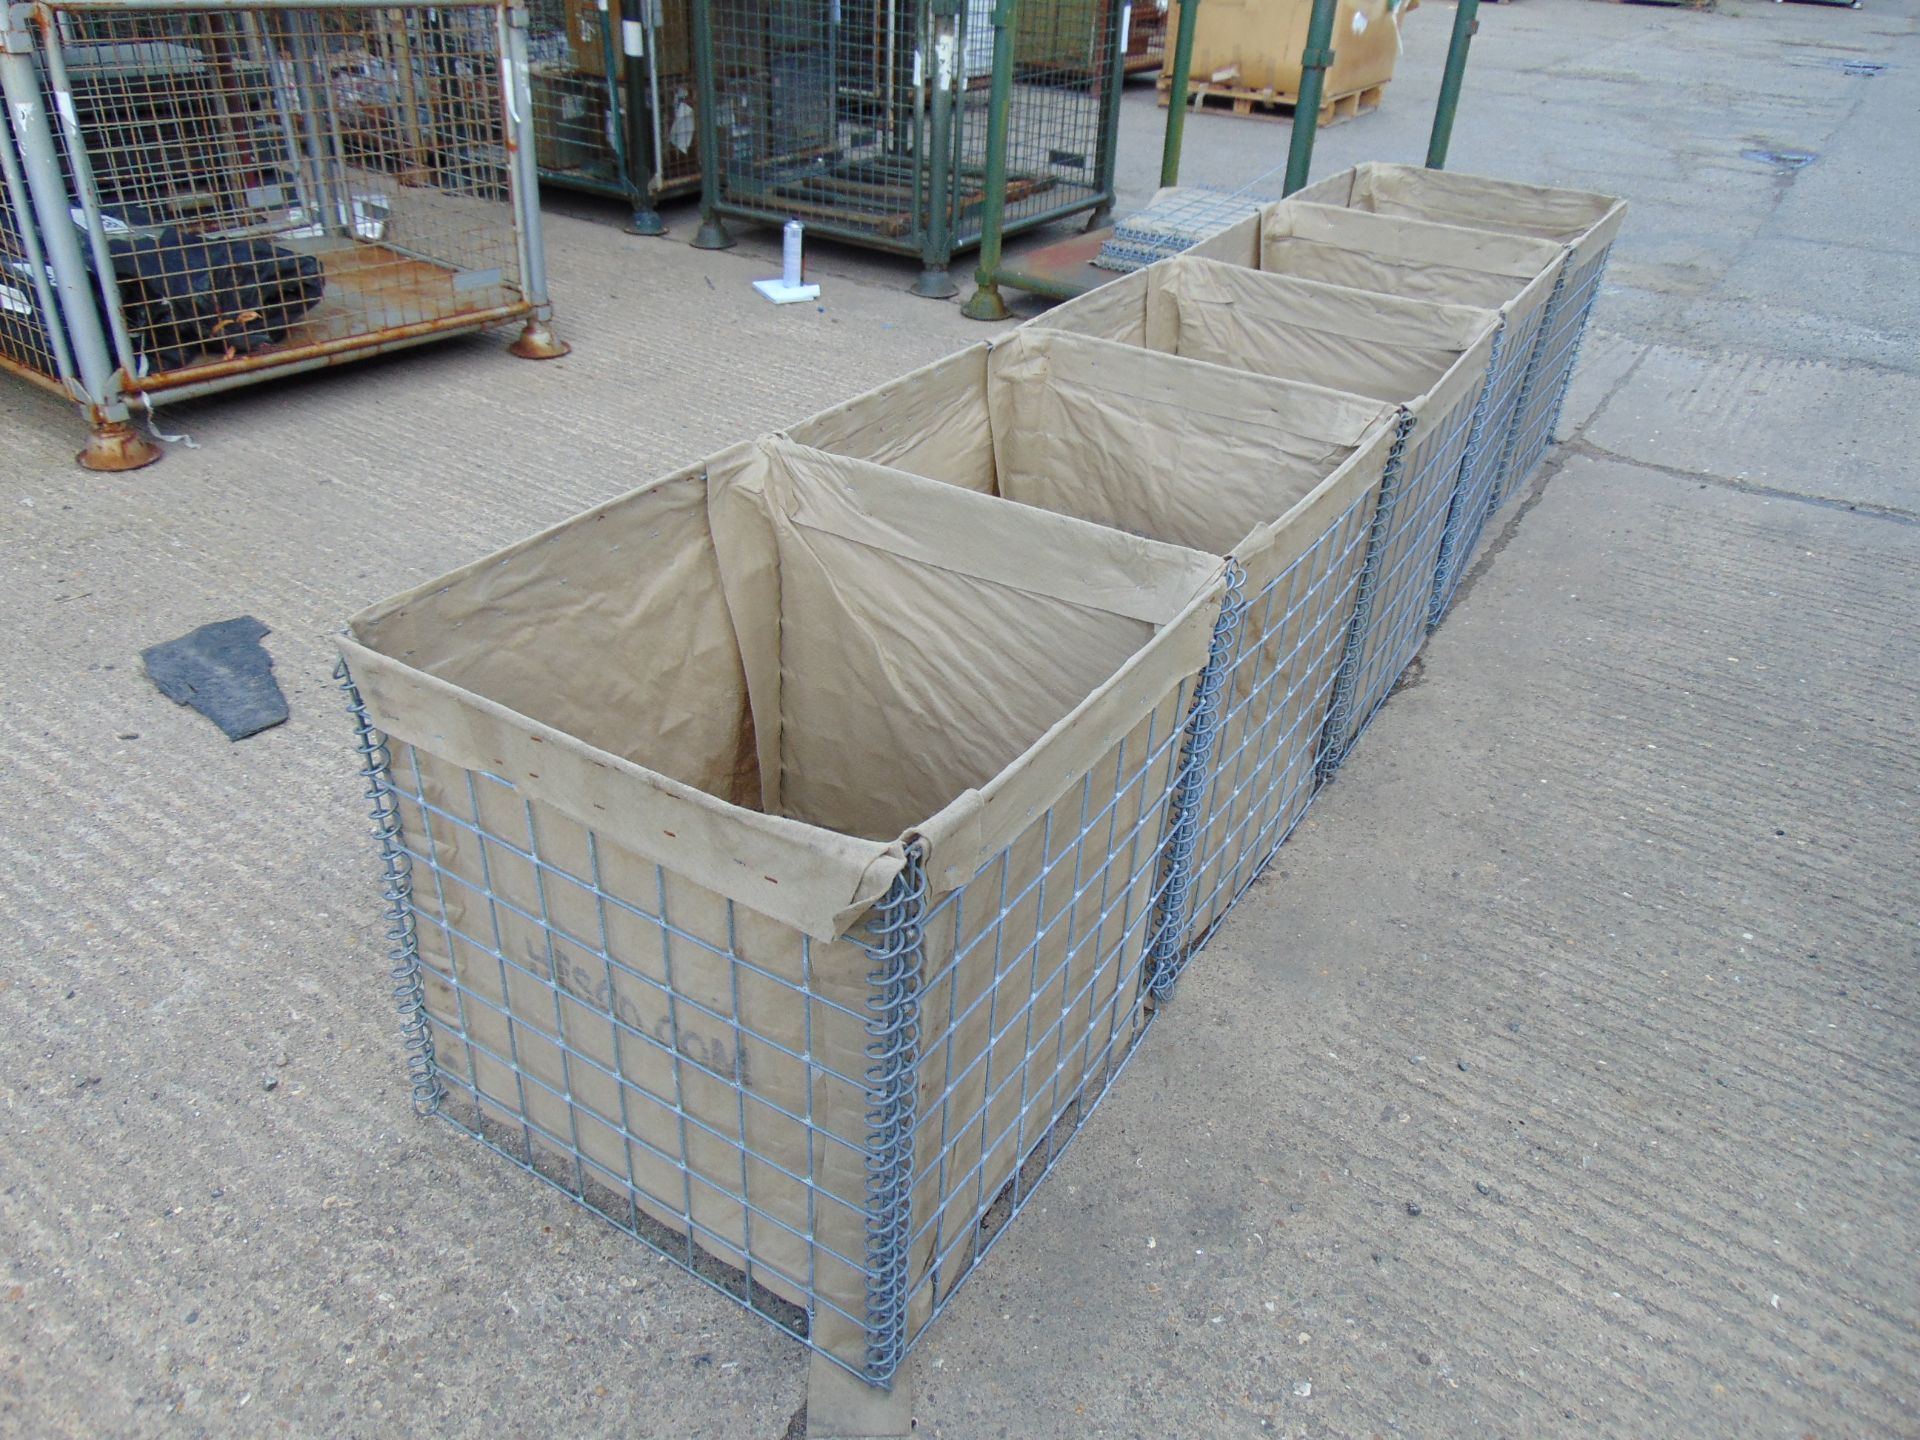 2 x New Unissued Hesco 3.2m x 64cms x 60cms Basket Units, 5 Baskets in Each Sections